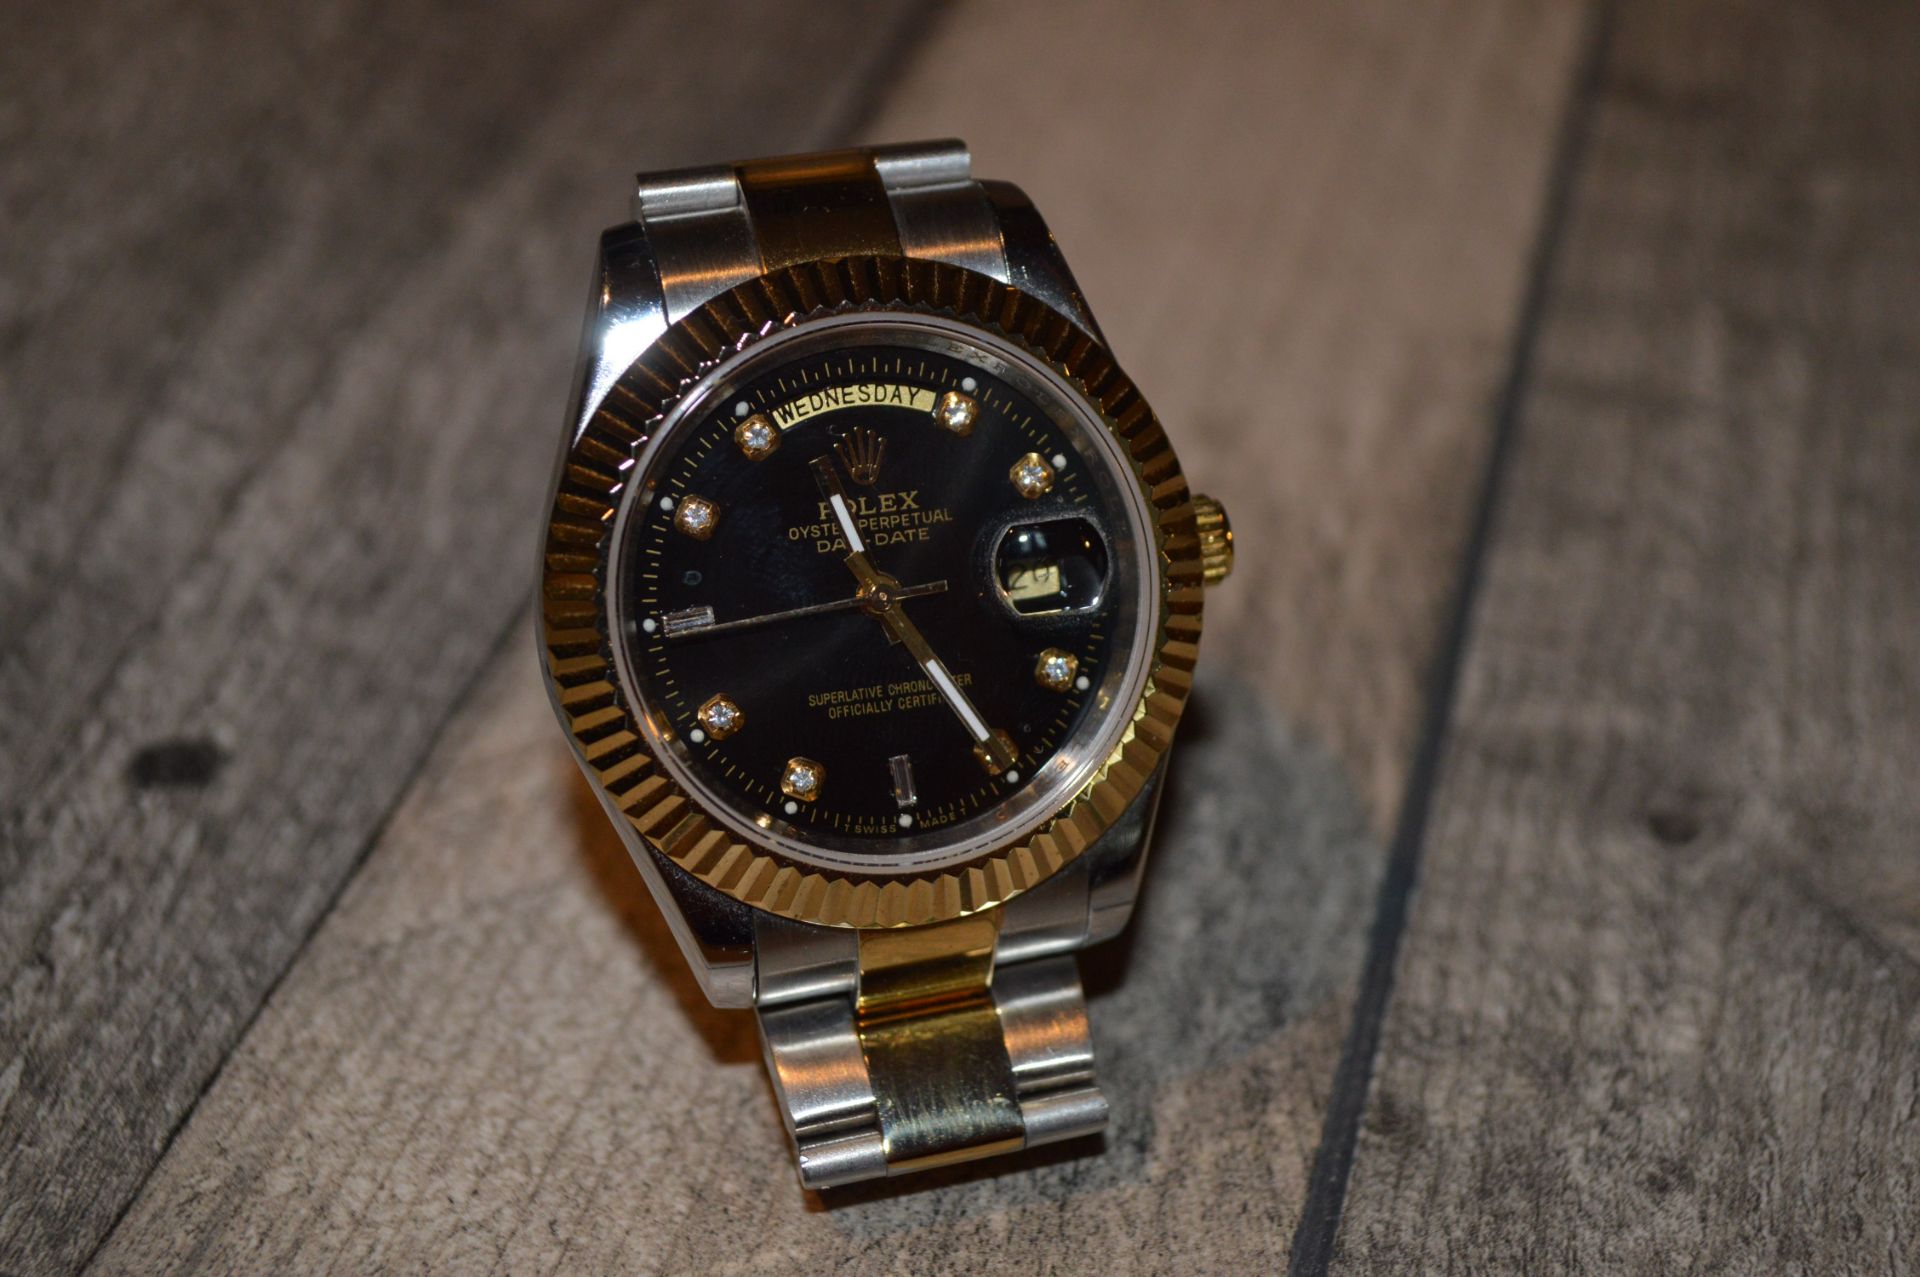 ROLEX DAY DATE OYSTER PERPETUAL WRIST WATCH, APPROX 45MM FACE ASSUME NON-GENUINE, NO BOX, PAPERS ETC